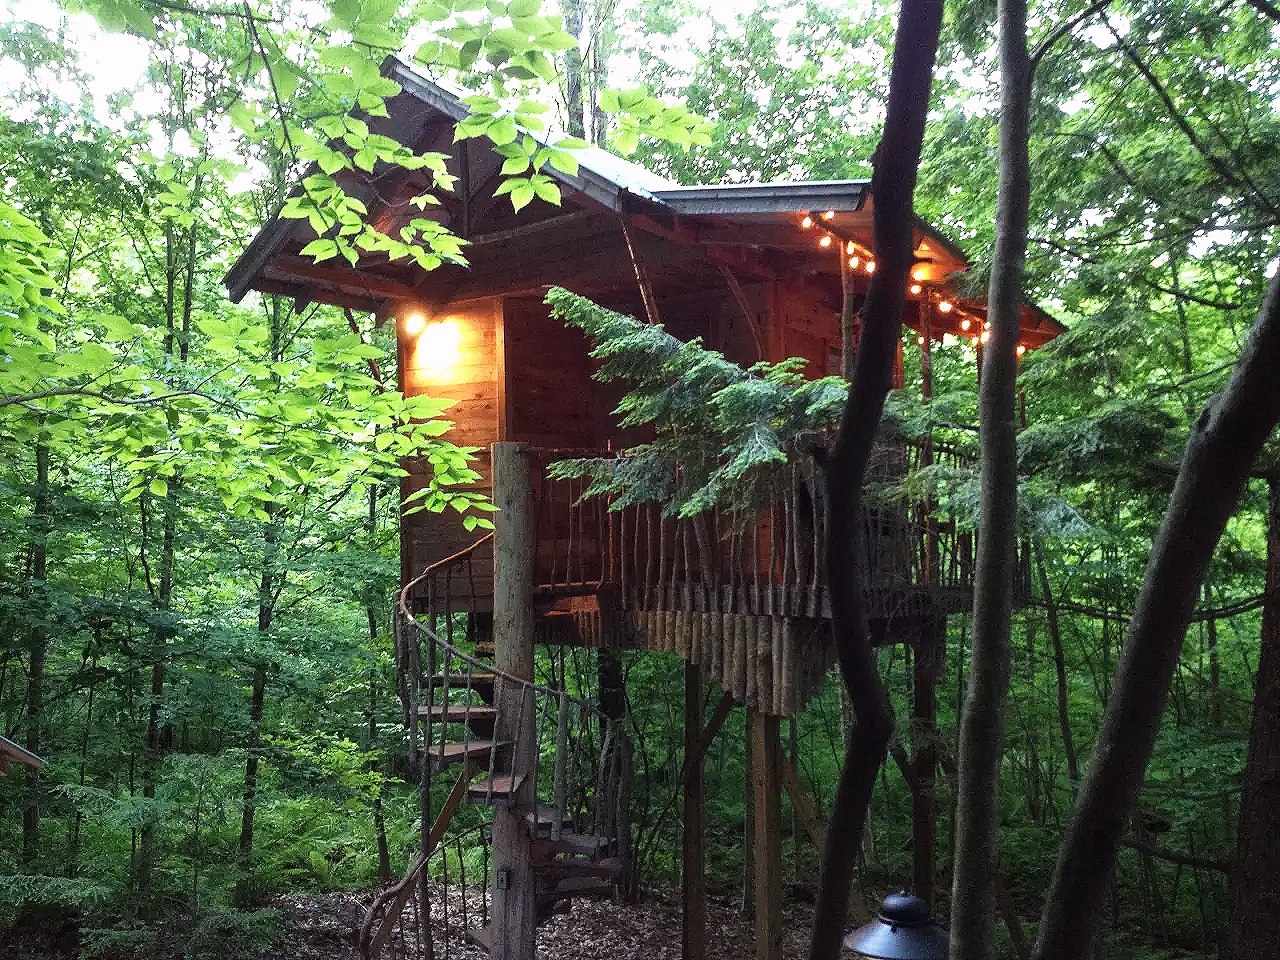 This summer, you could stay in an Adirondack tree house retreatsqft